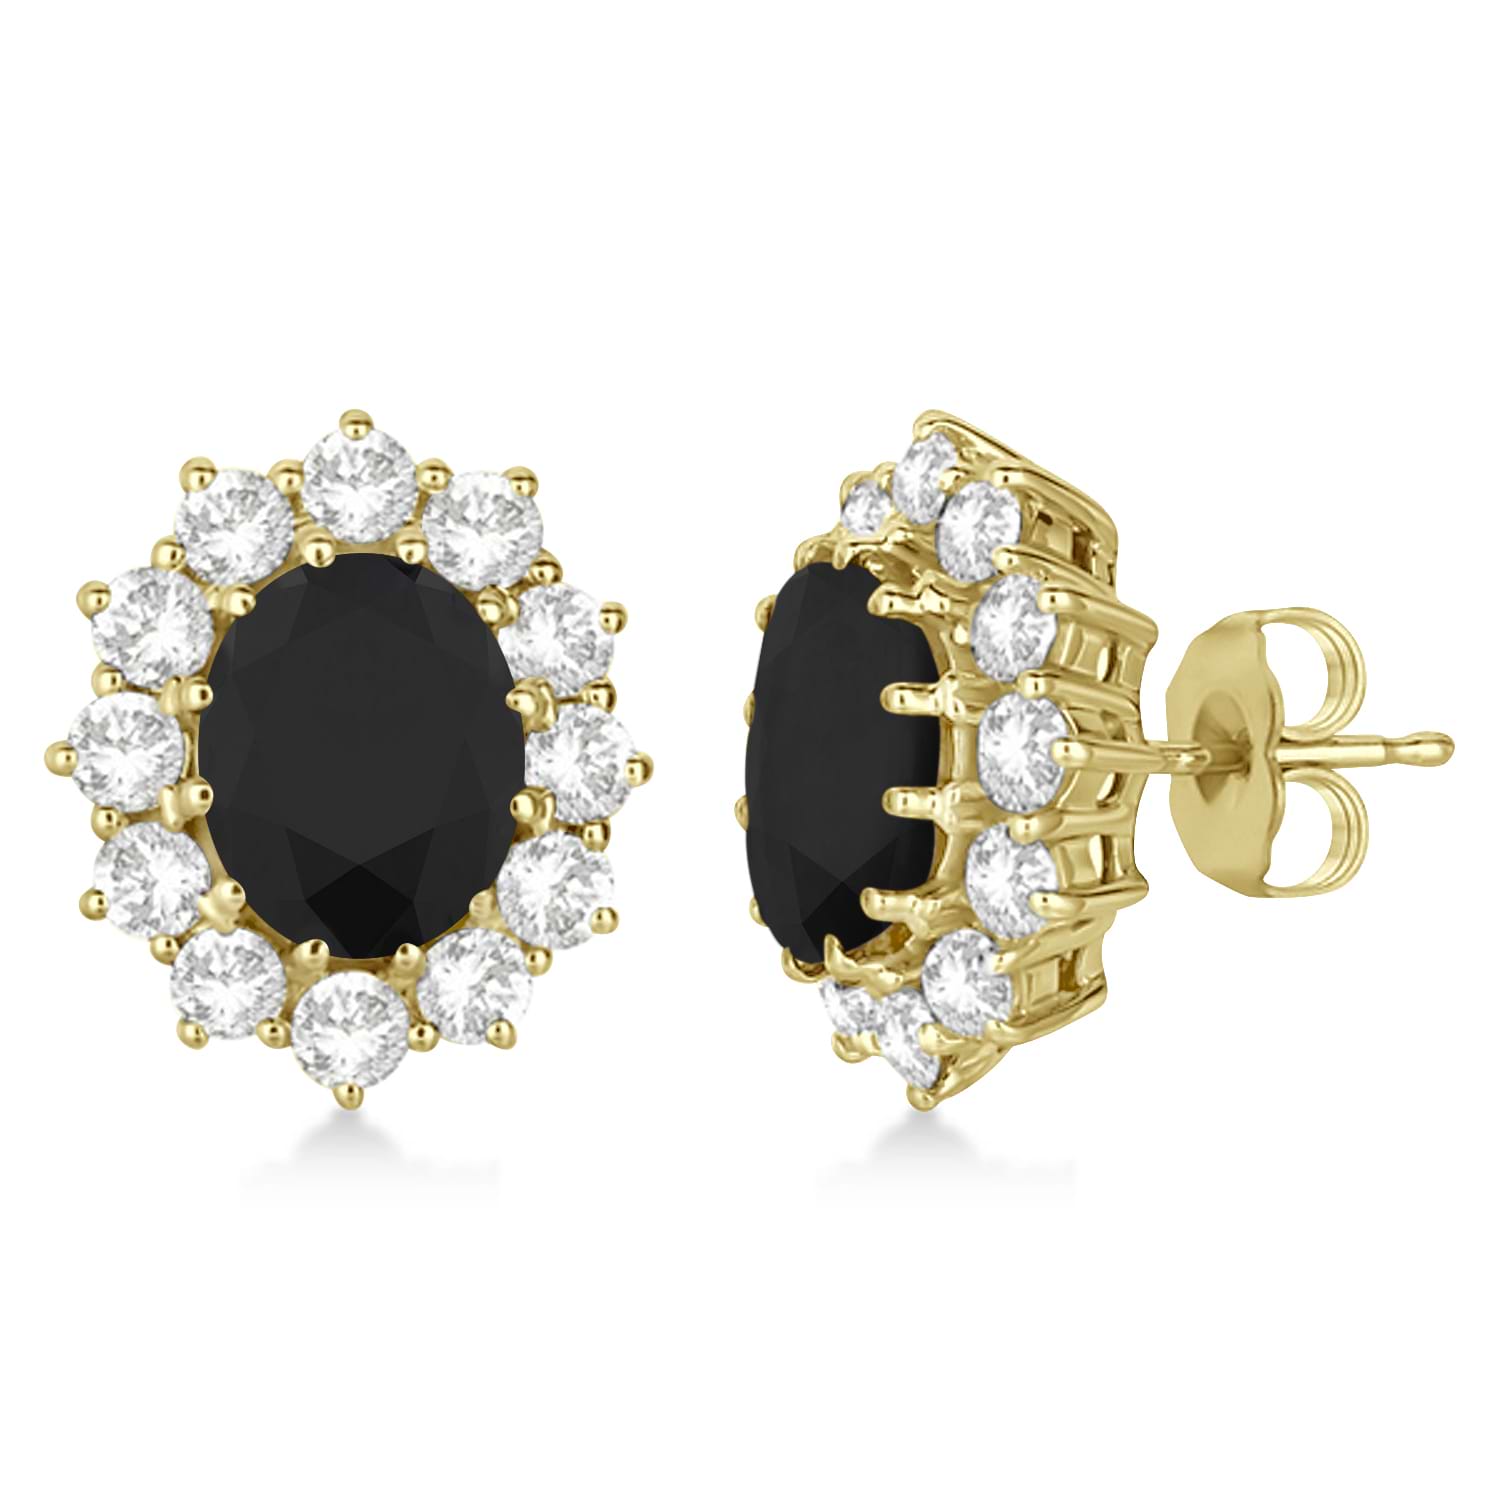 Oval Black and White Diamond Earrings 18k Yellow Gold (5.55ctw)